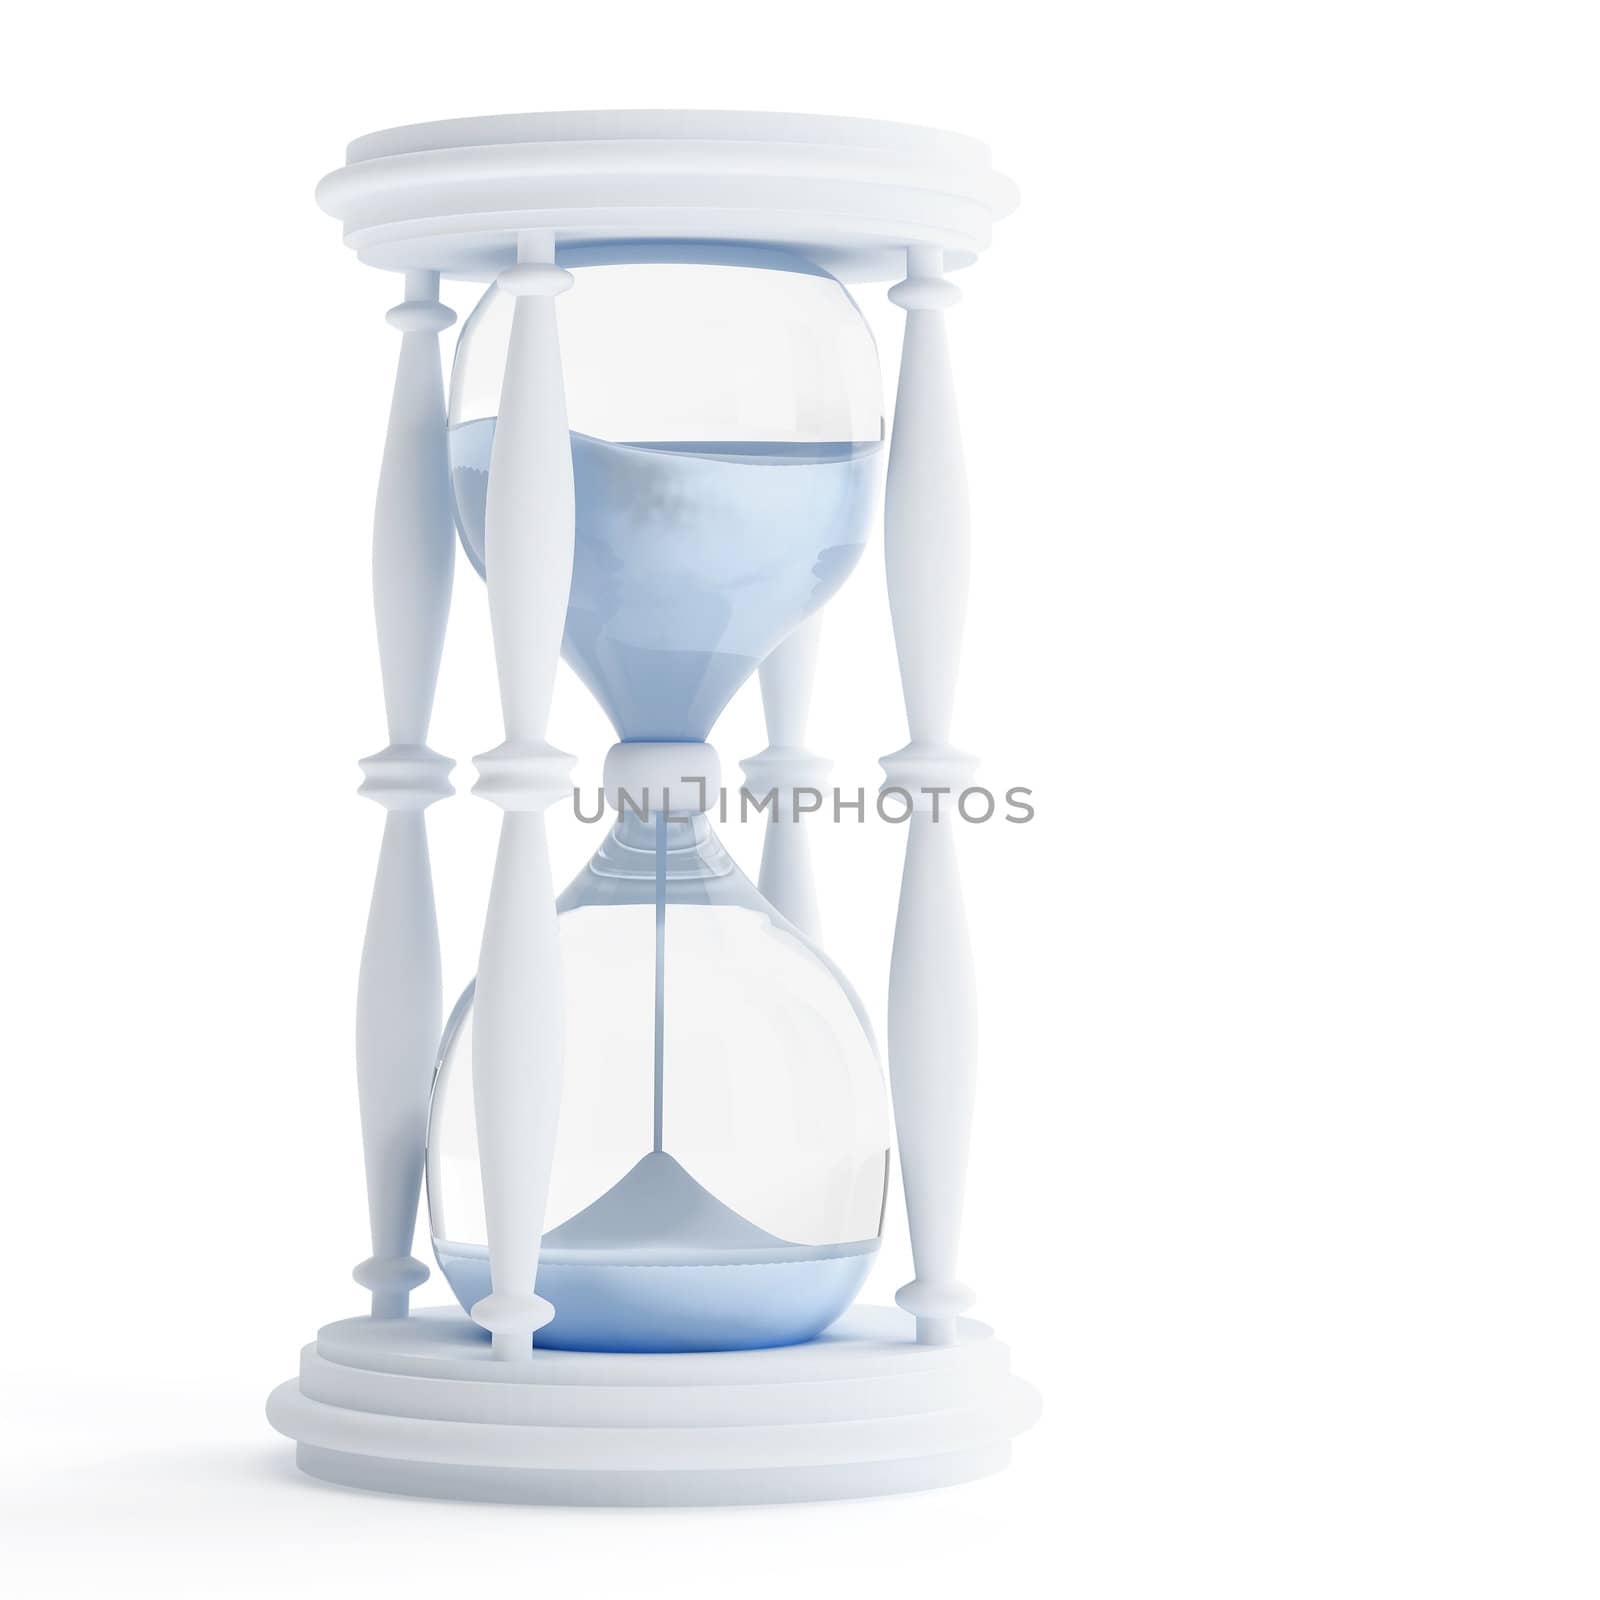 Sand-glass counts time on a white background